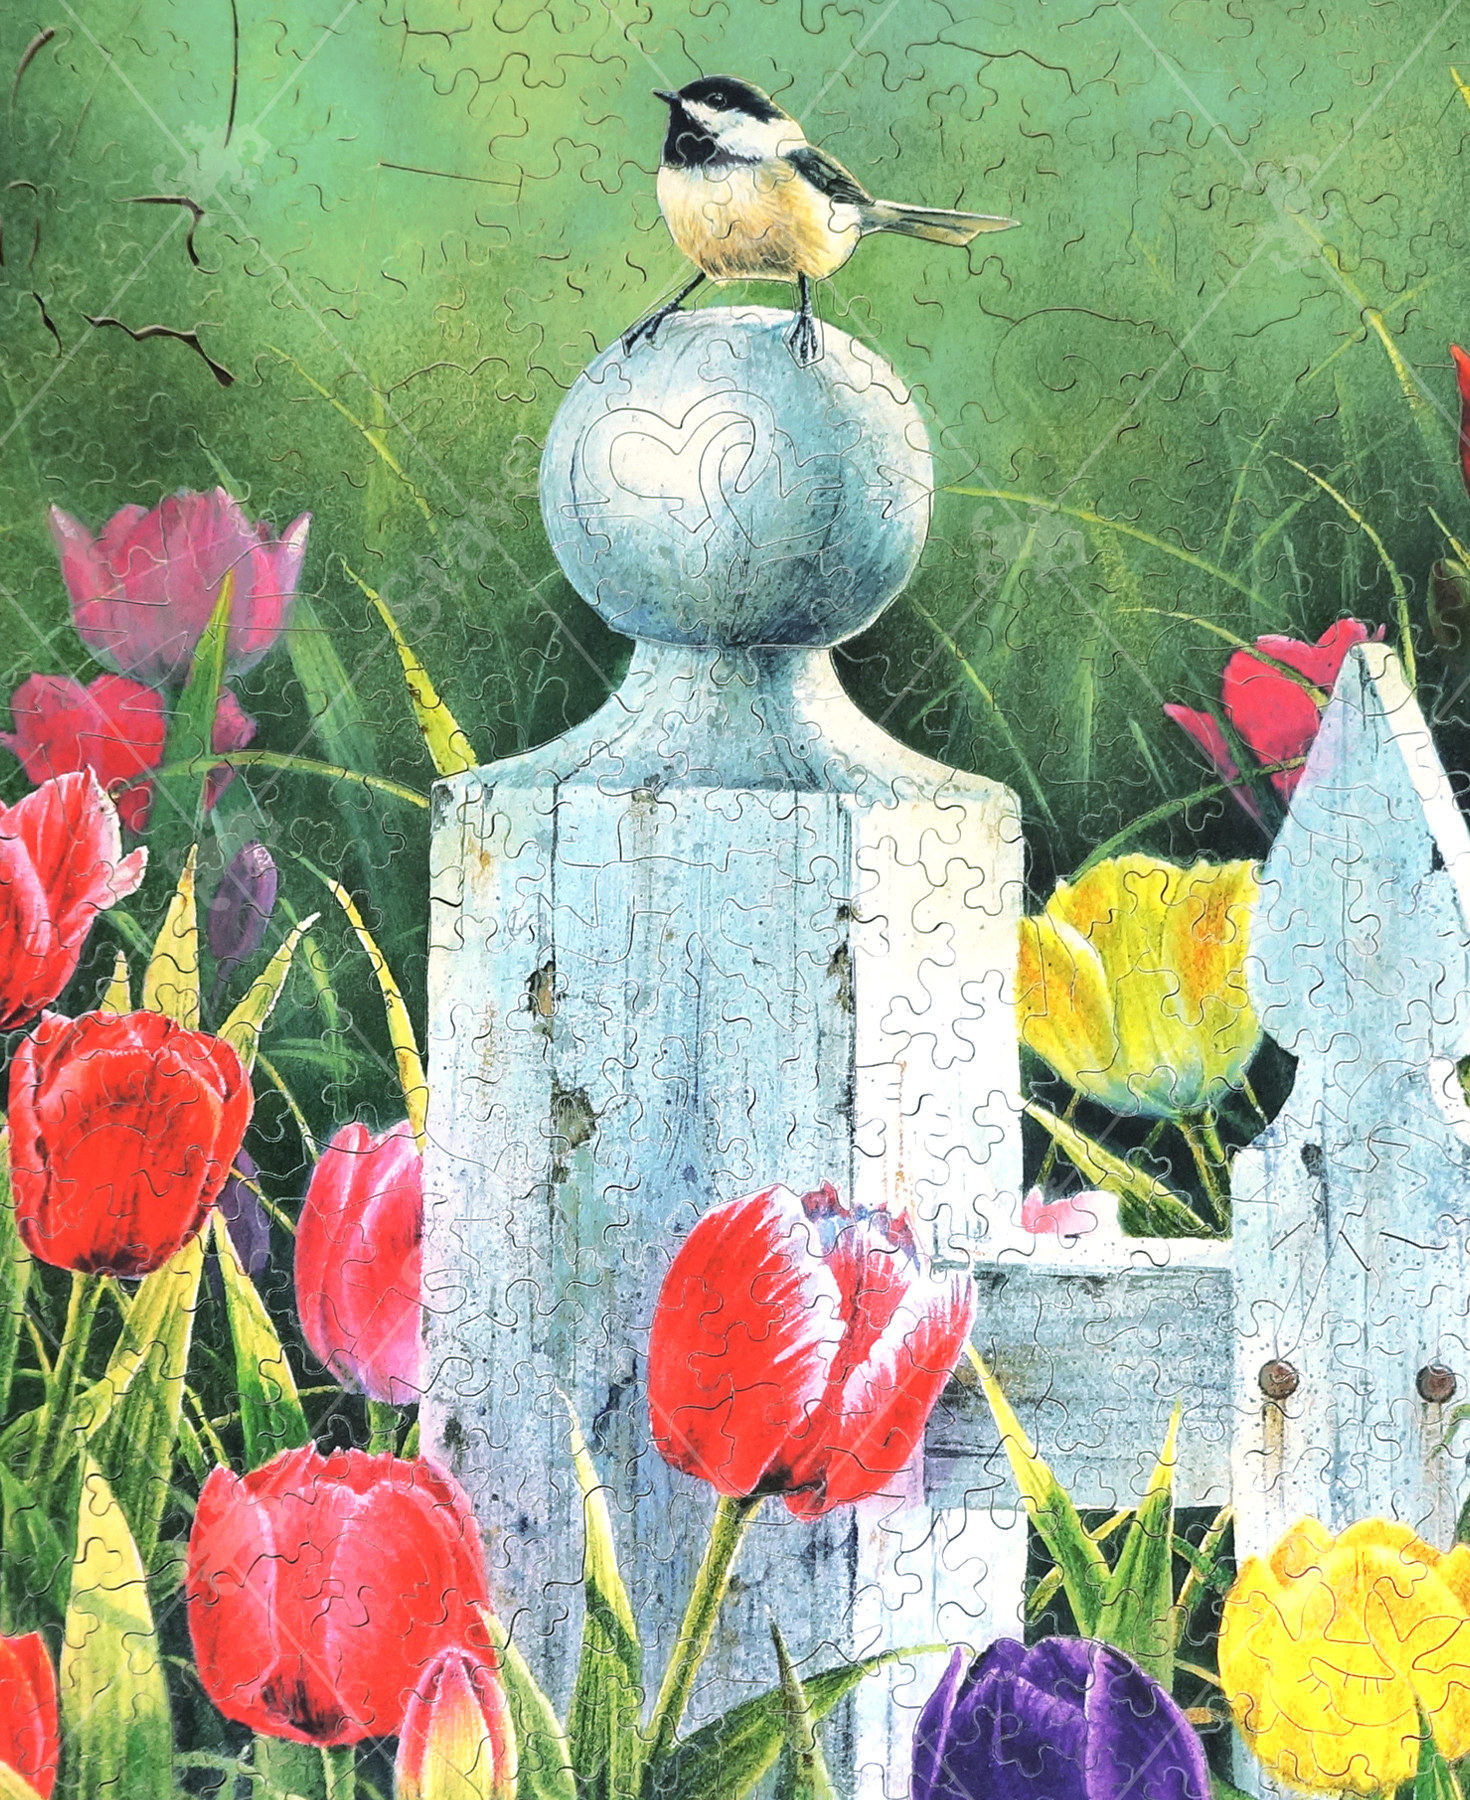 Cut version of Picket Fence Bouquet wooden jigsaw puzzle featuring a chickadee sitting on a picket fence in a flower garden of tulips.